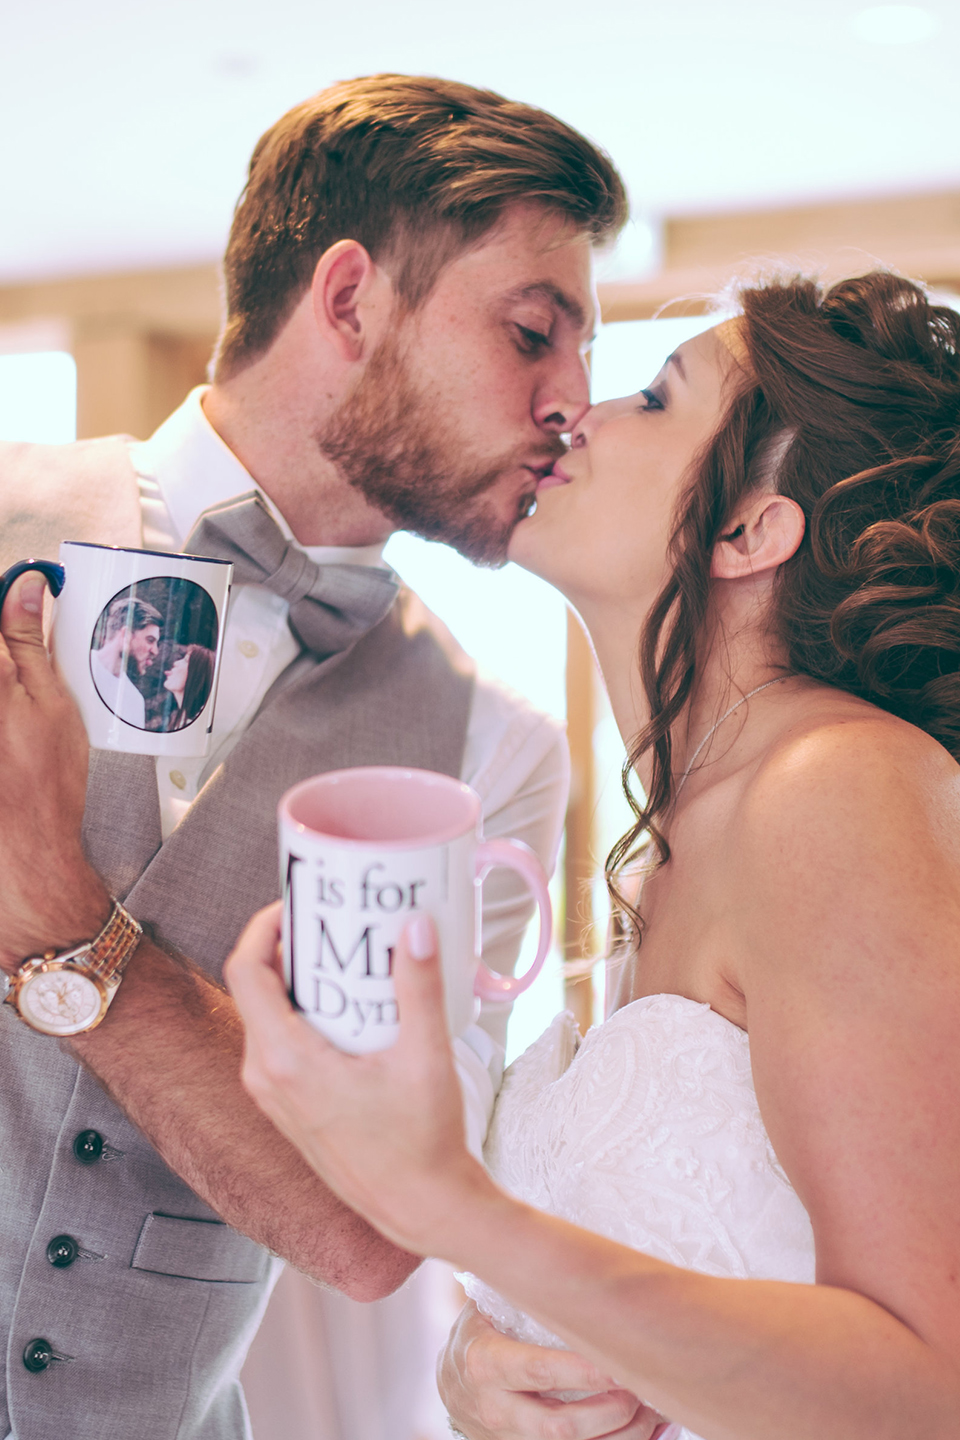 The couple were gifted personalised mugs on their wedding day at Bassmead Manor Barns